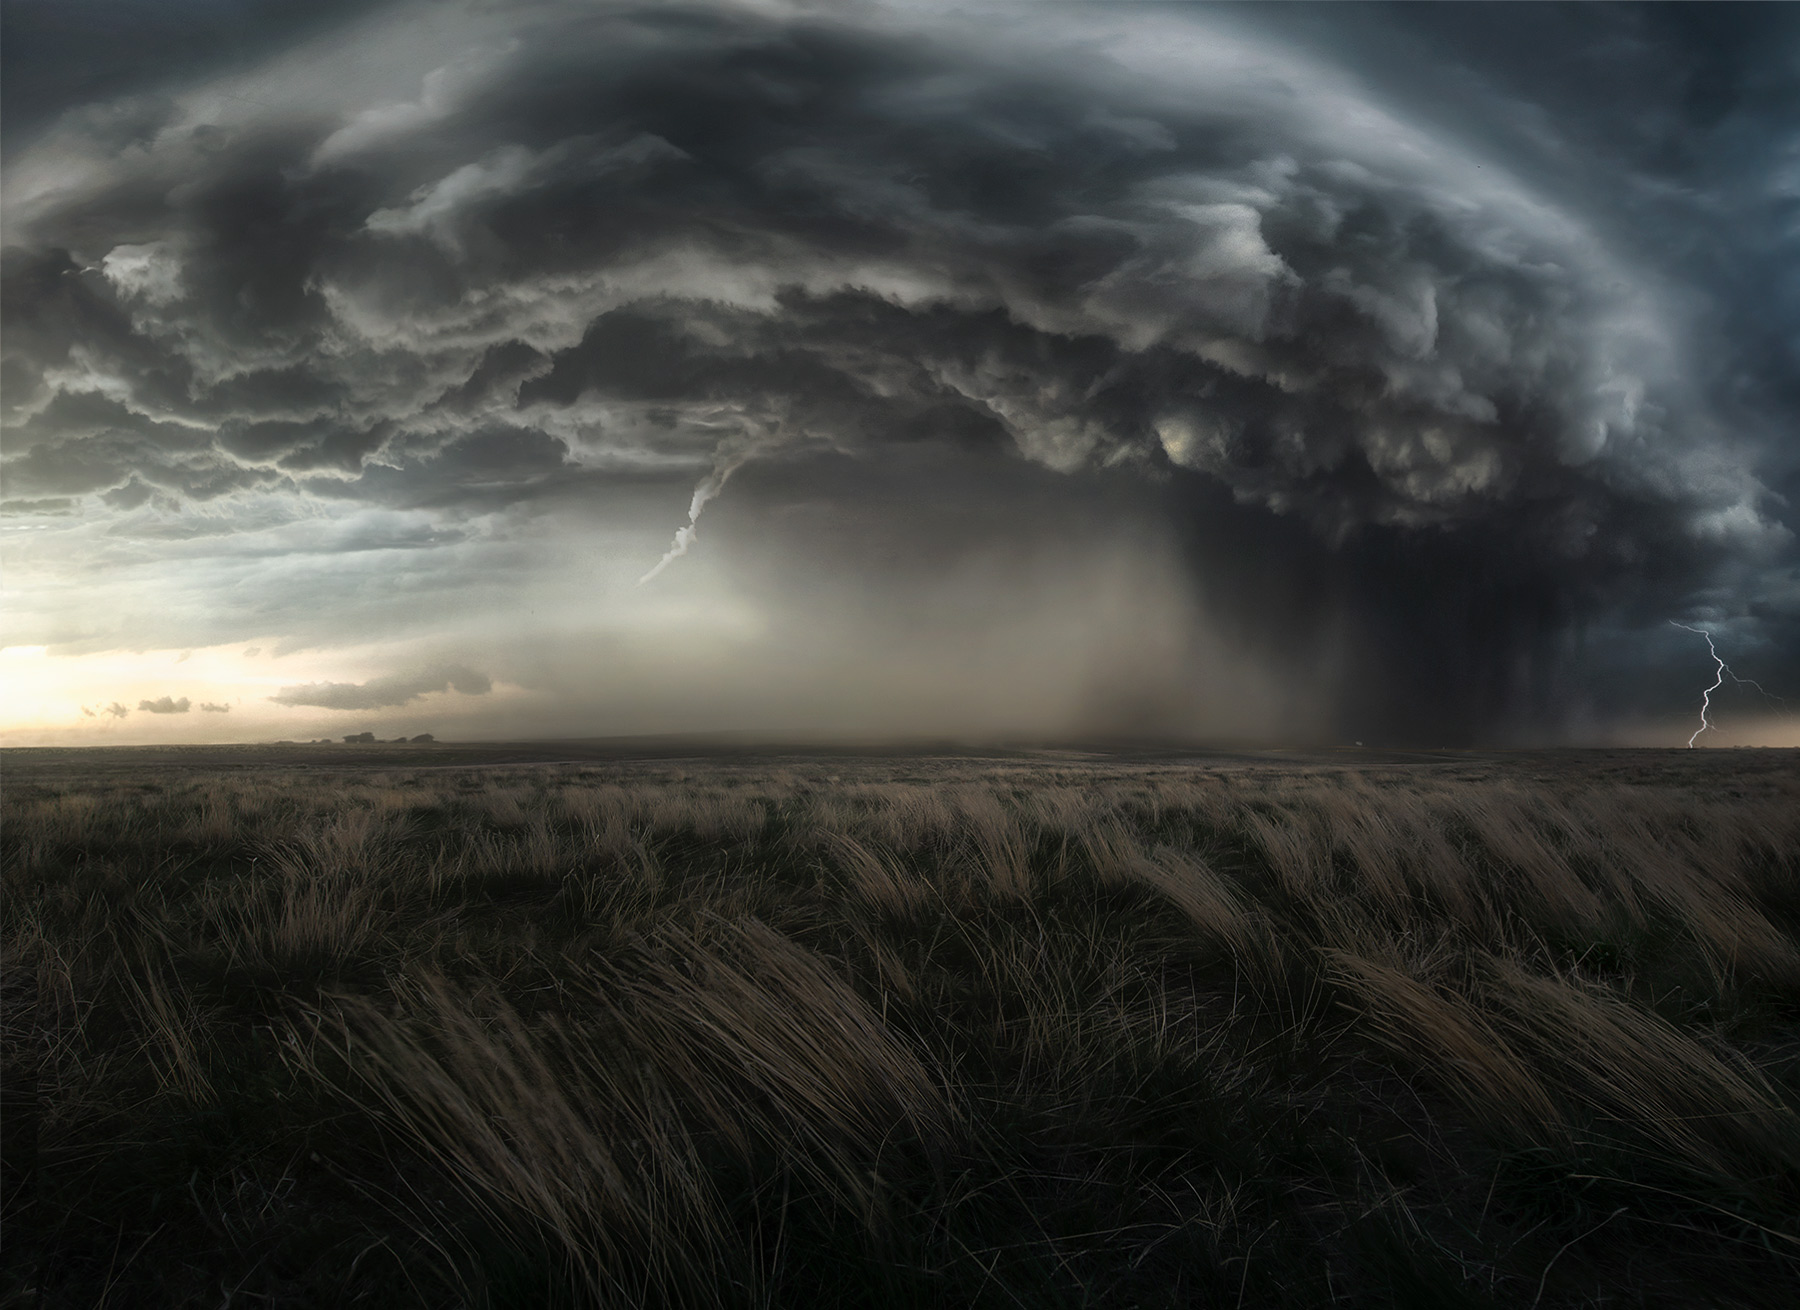 Supercell thunderstorm on the plains above wind swept fields